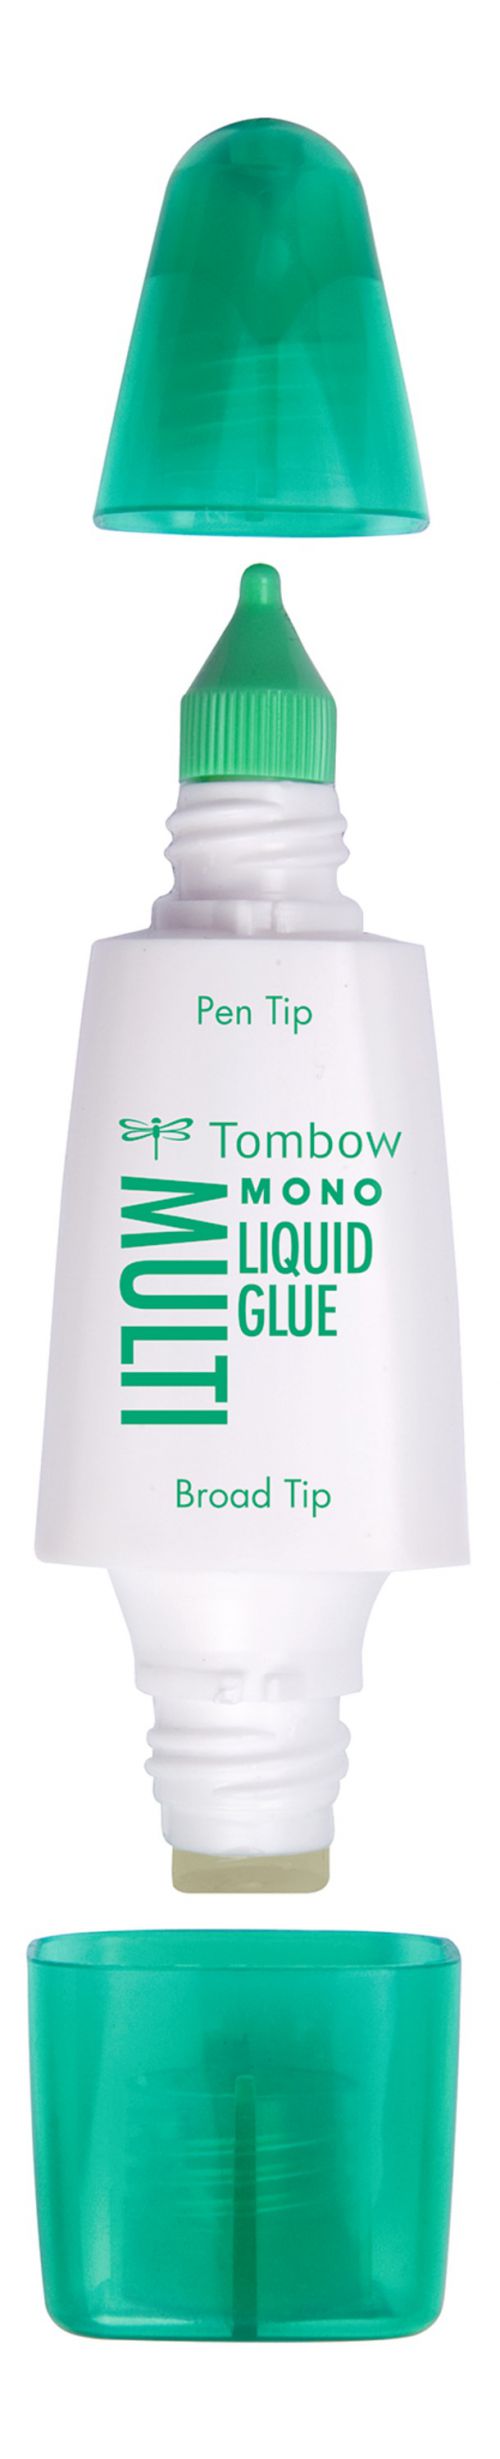 Tombow MONO Multi Liquid Glue With Two Tips White (Pack 10) - PT-MTC-10P Tombow